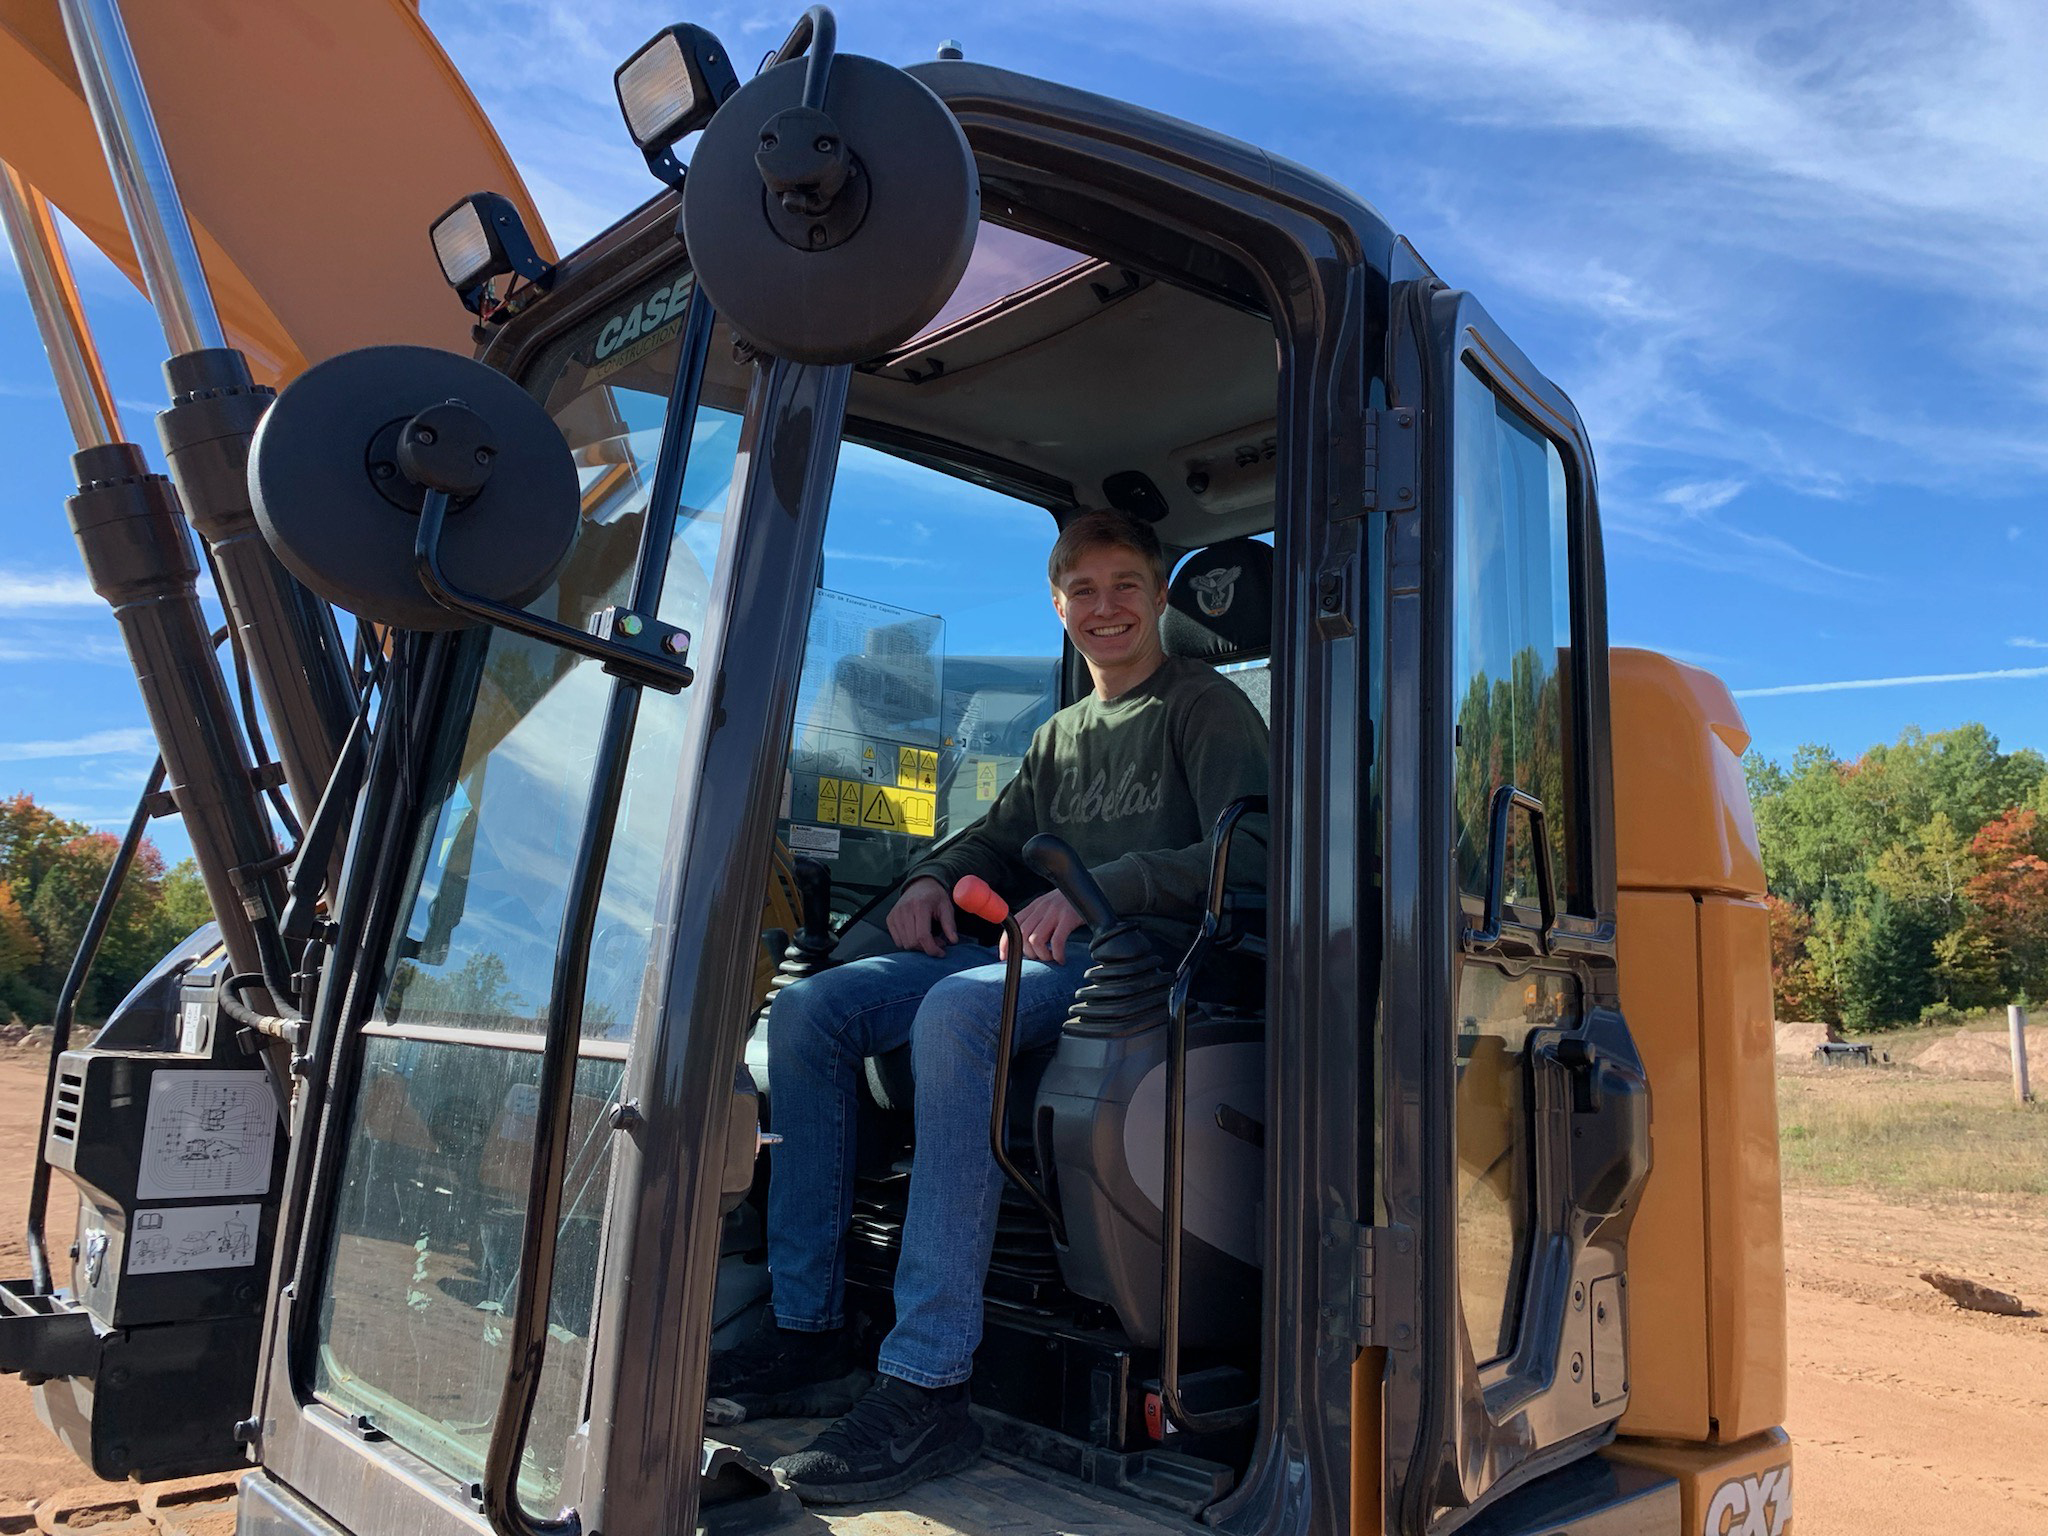 THS students gain hands-on experience operating CASE construction equipment